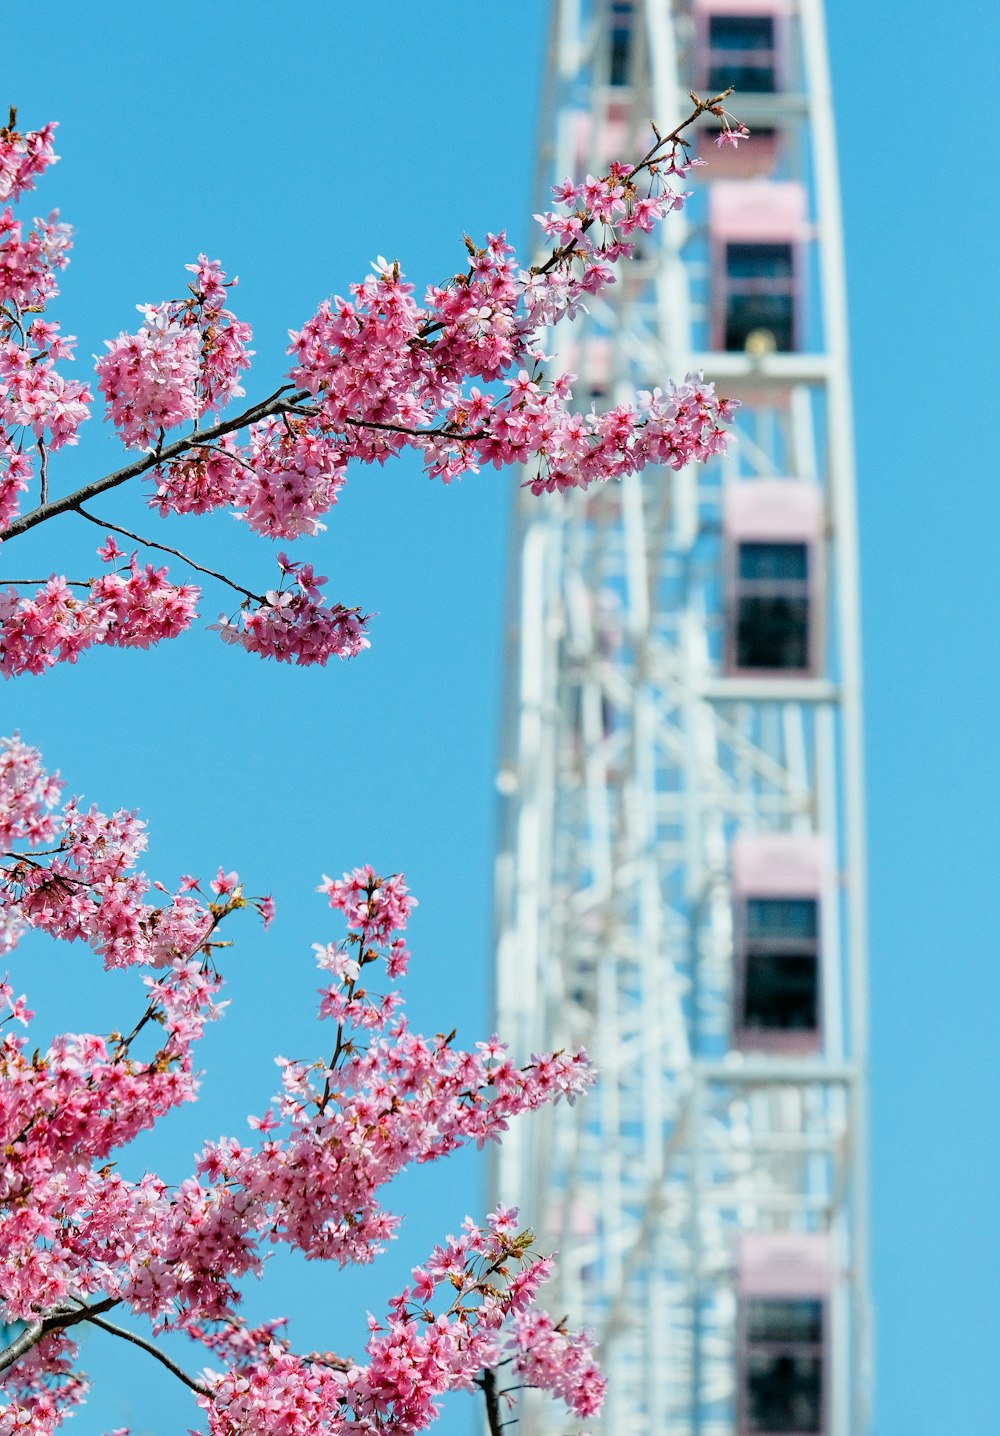 a ferris wheel with pink flowers in the foreground